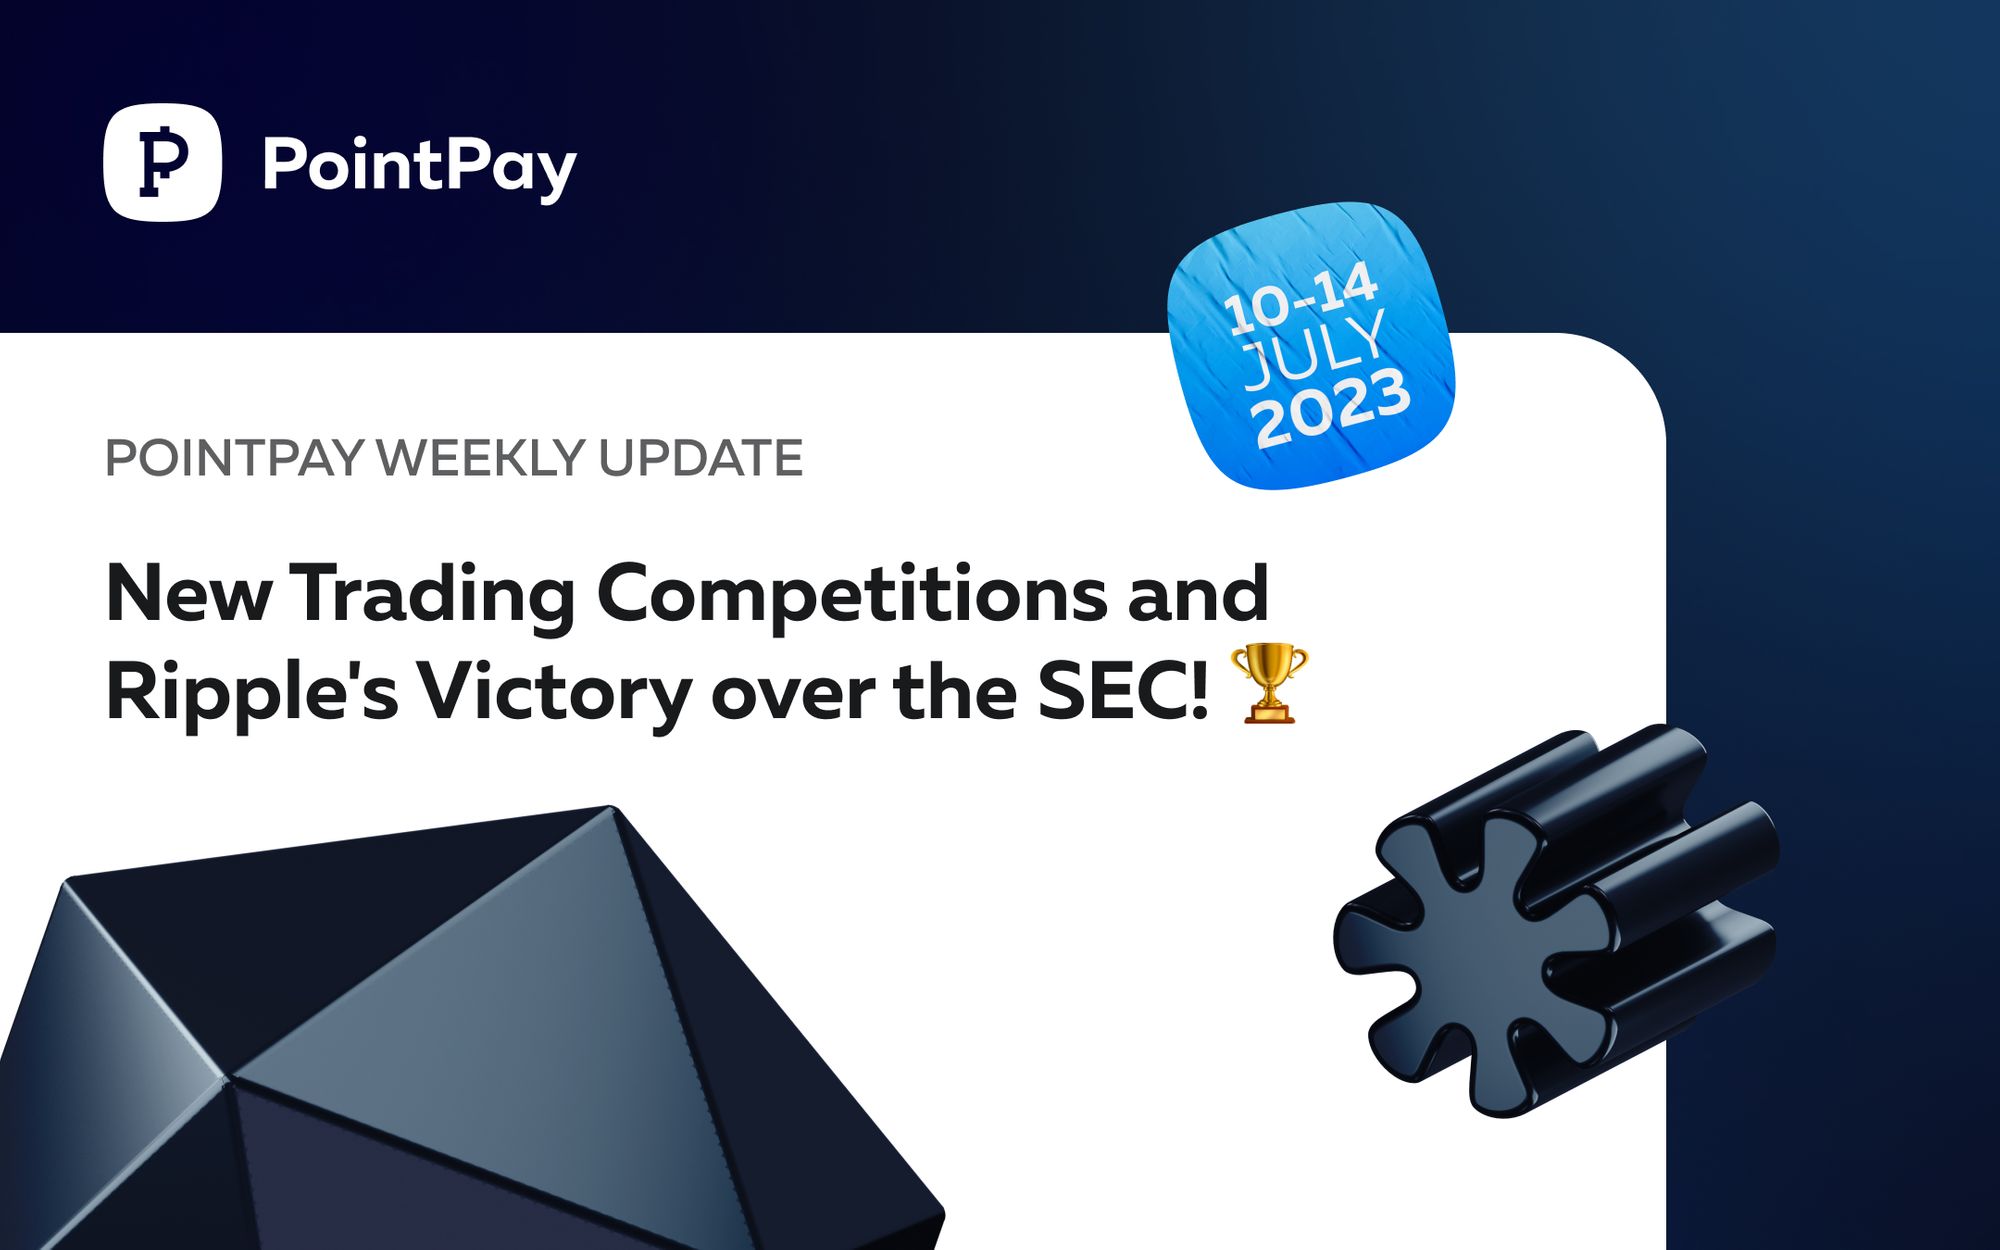 PointPay Weekly Update (10 -14 July)